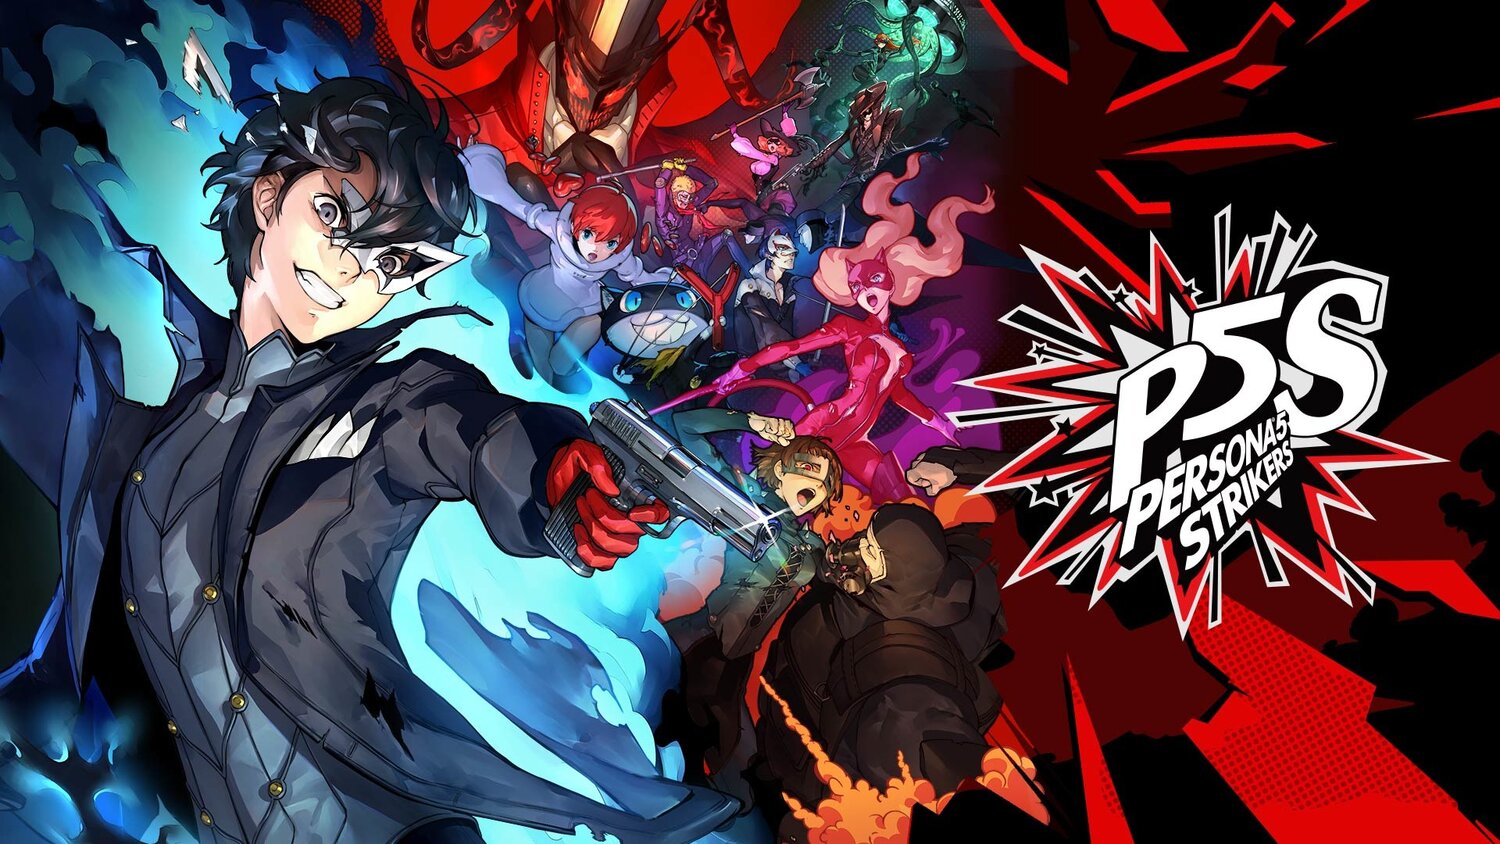 Persona 5 Strikers: 10 Details About The Main Characters You Didn't Know